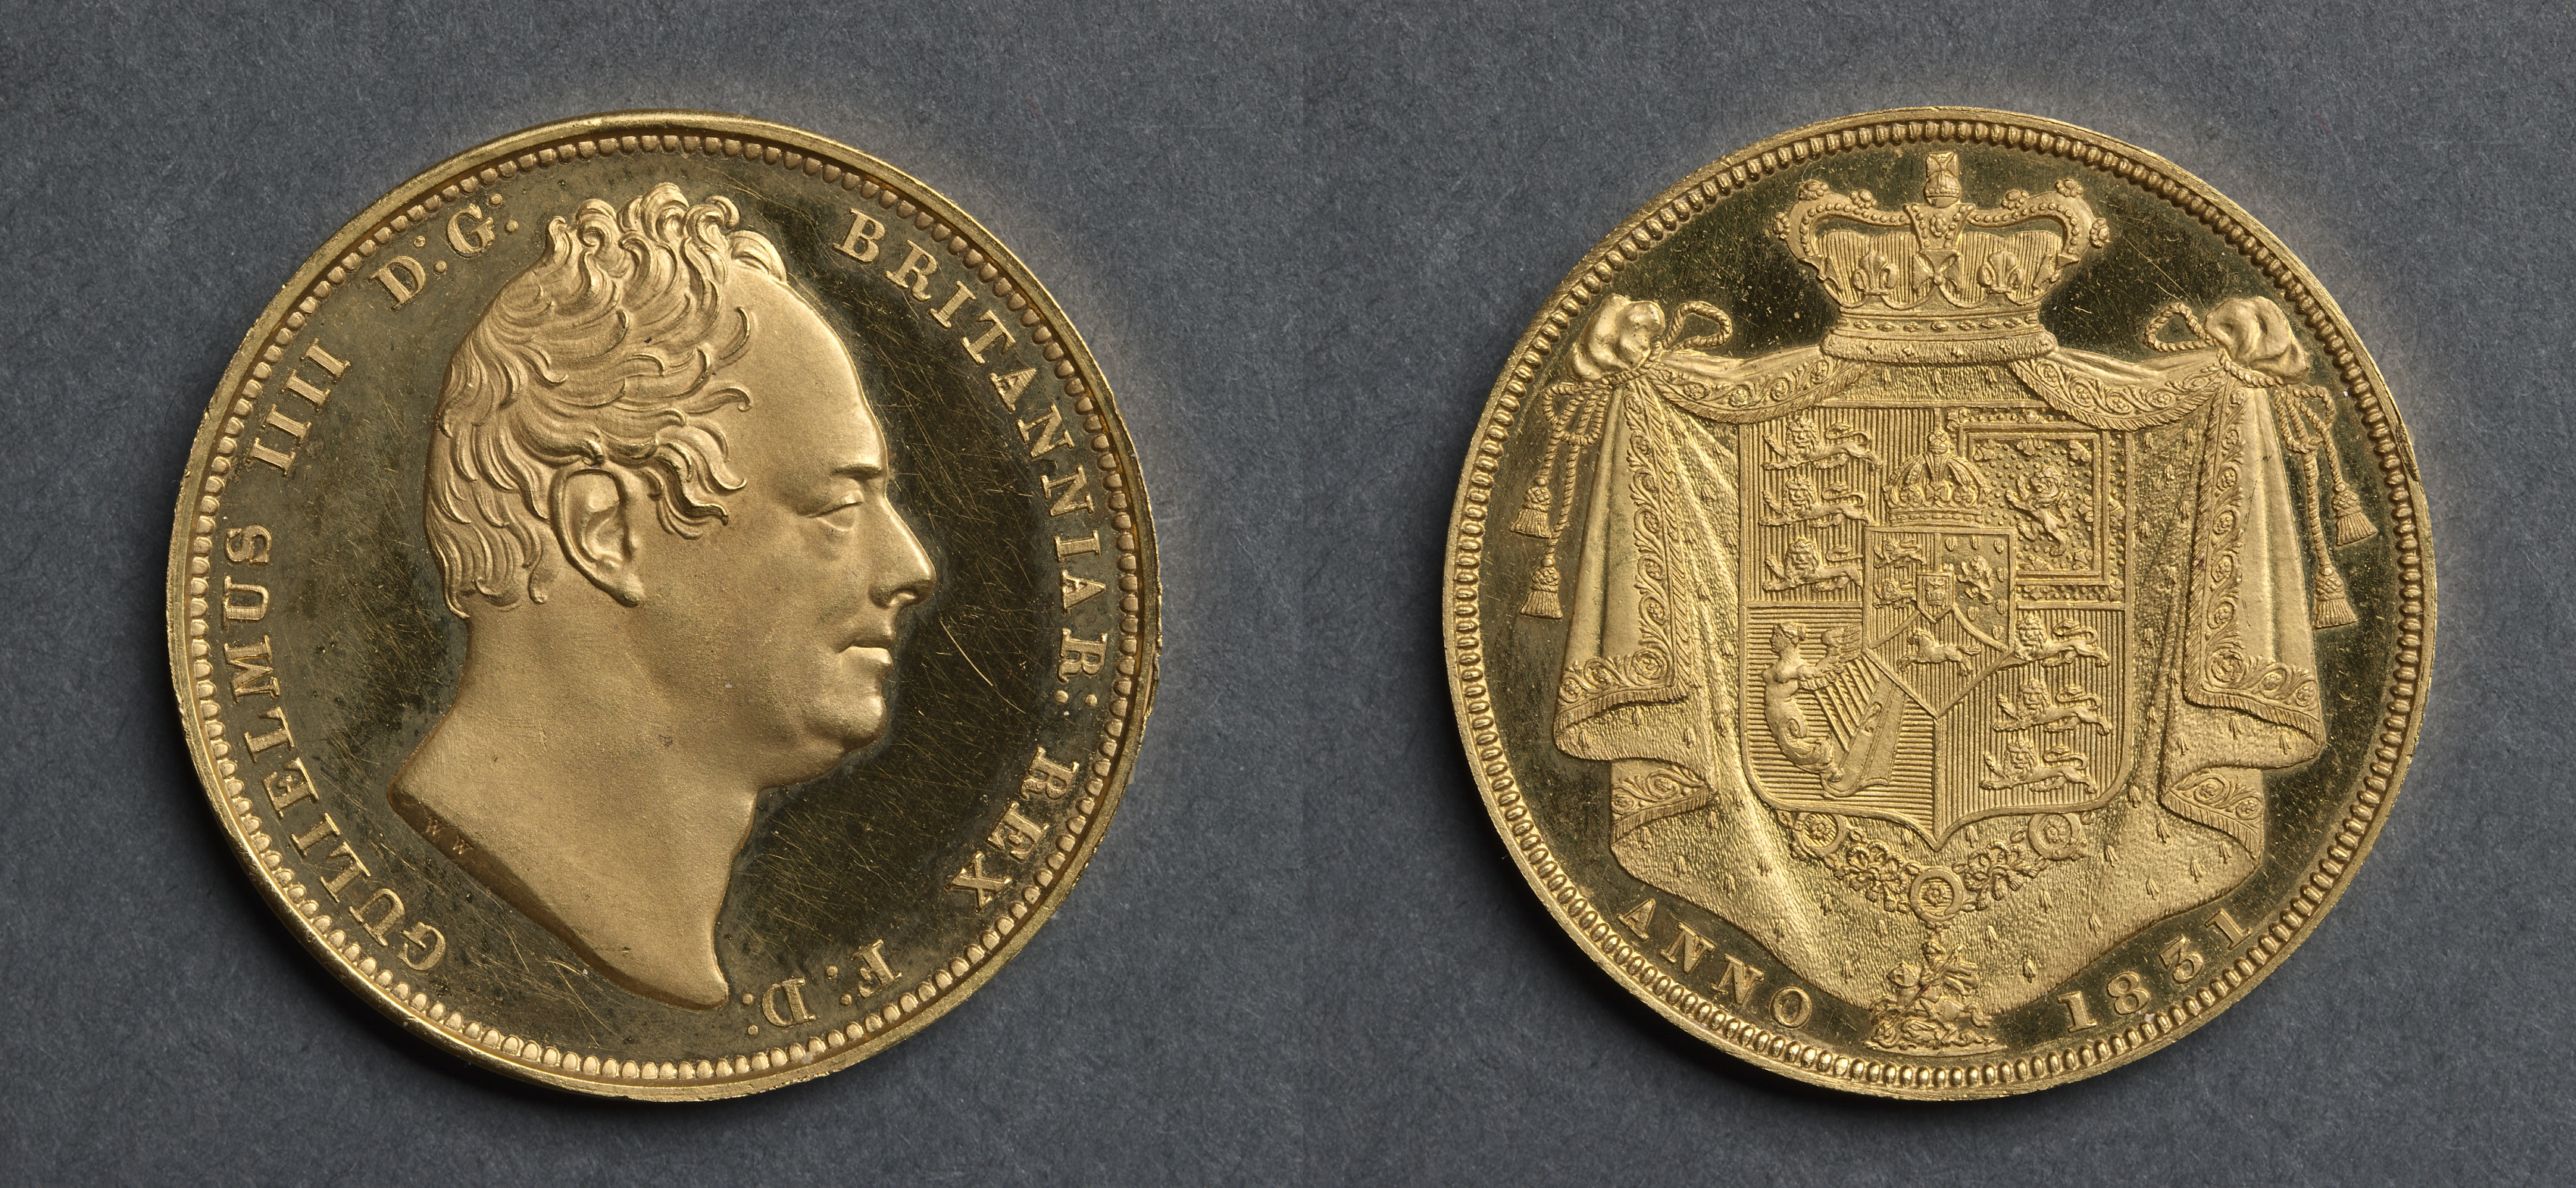 Two Pound Piece: George IV (obverse); Shield of Arms (reverse)